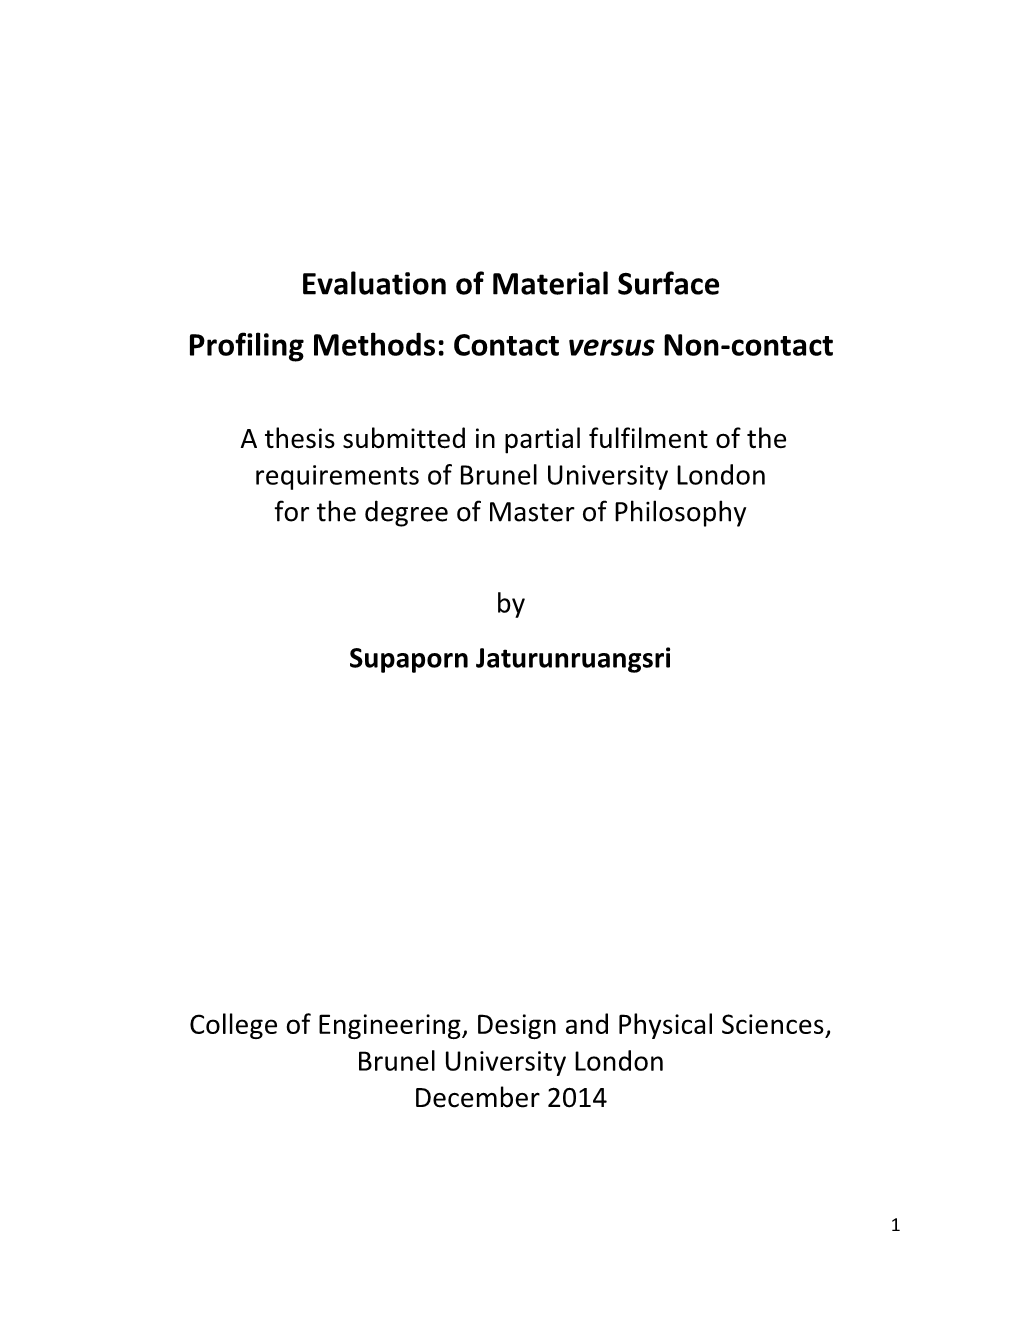 Evaluation of Material Surface Profiling Methods: Contact Versus Non-Contact